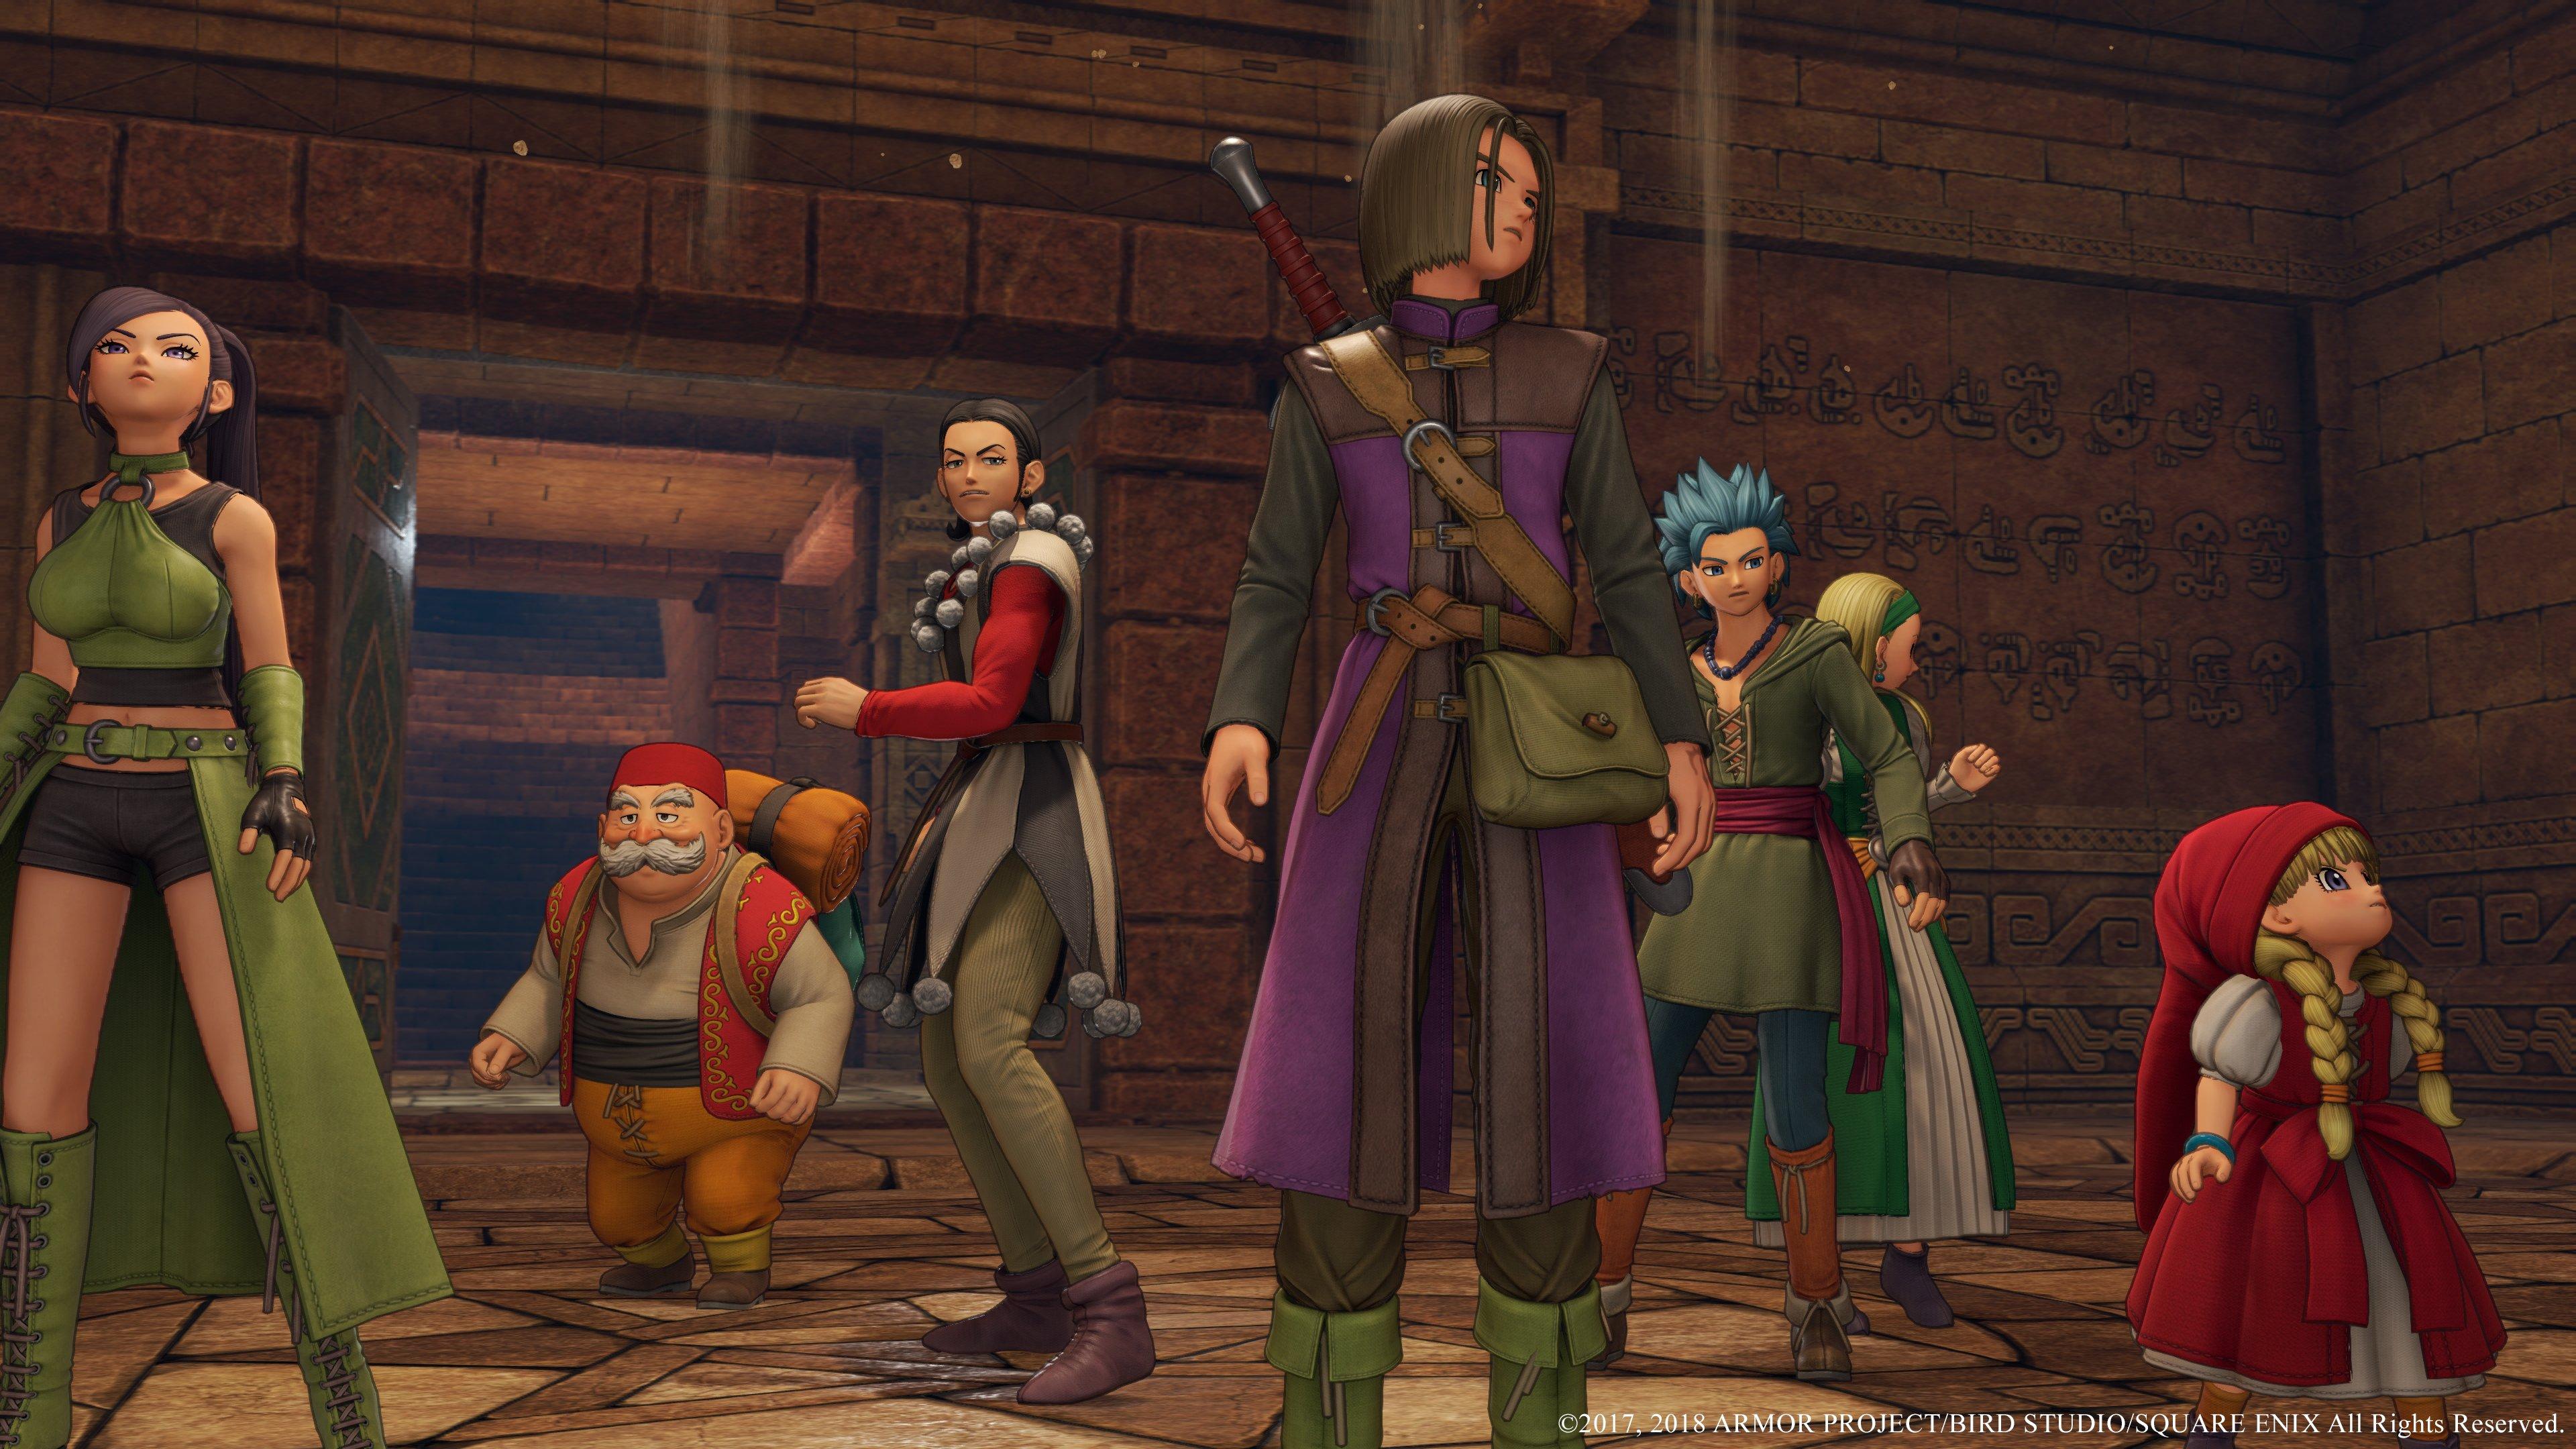 Dragon Quest XI S: Echoes of an Elusive Age - Definitive Edition, Square  Enix, PlayStation 4, [Physical], 662248924205 